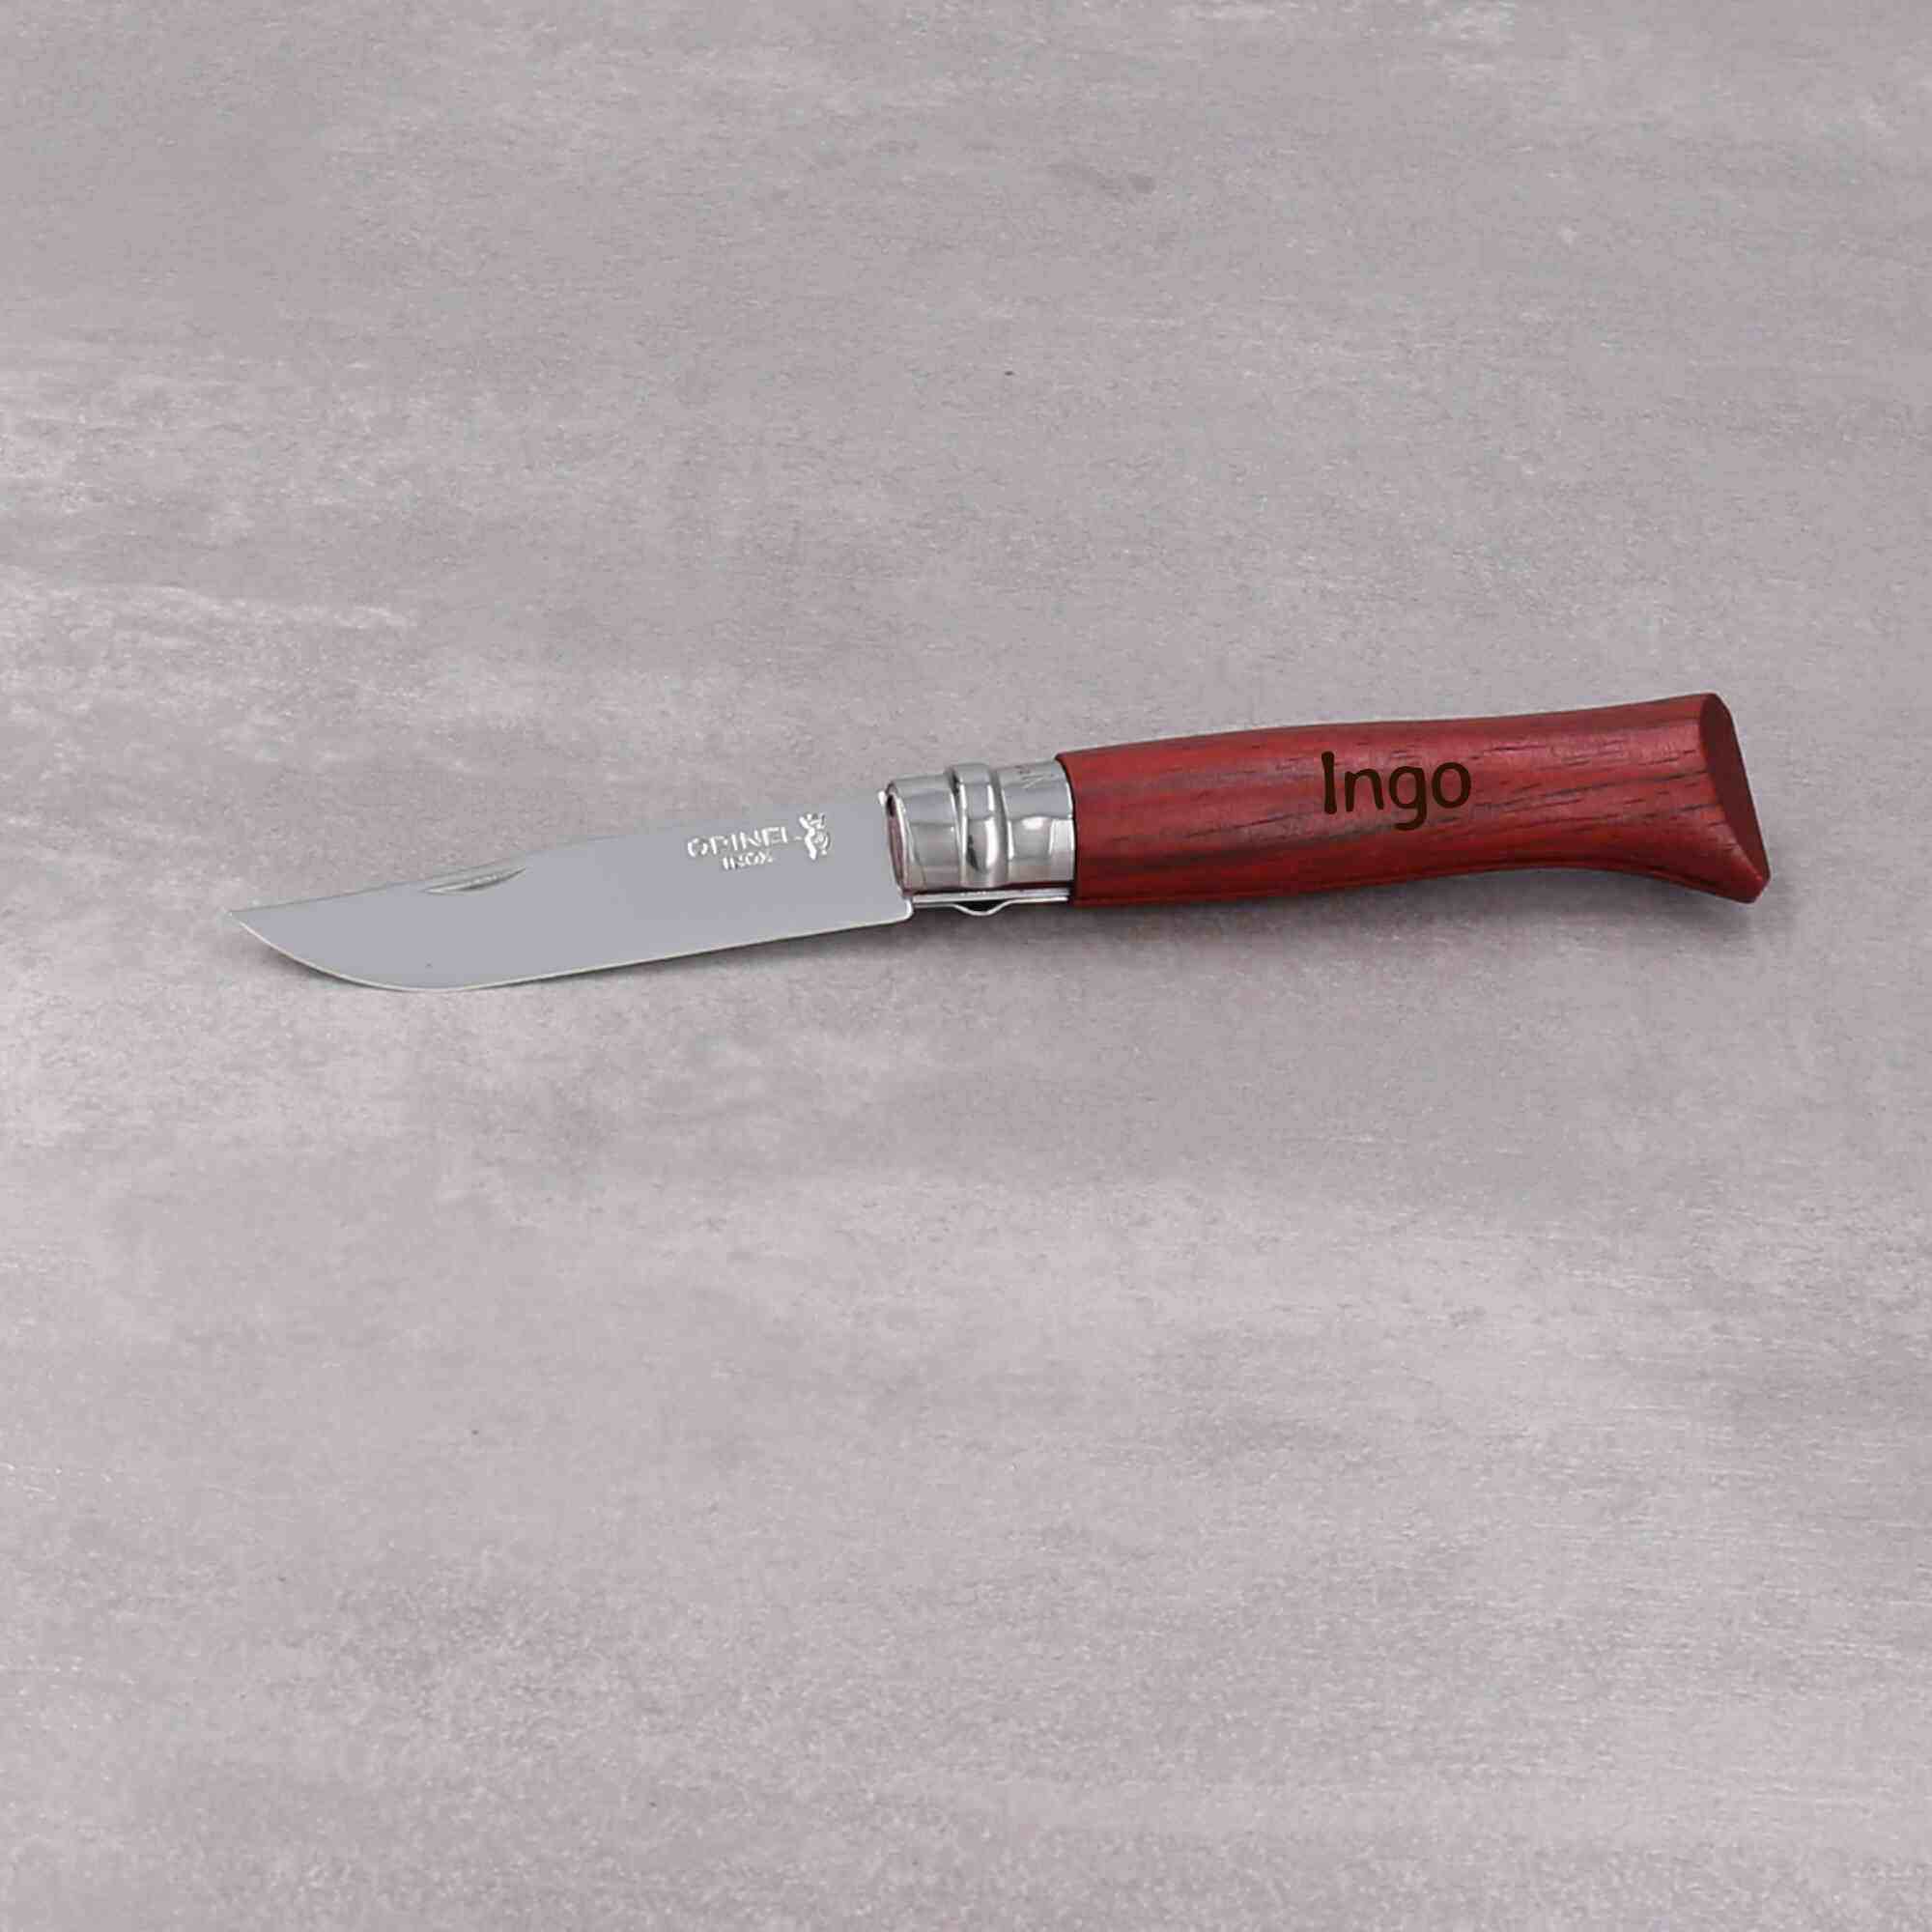 opinel No08, Padoukholz Taschenmesser